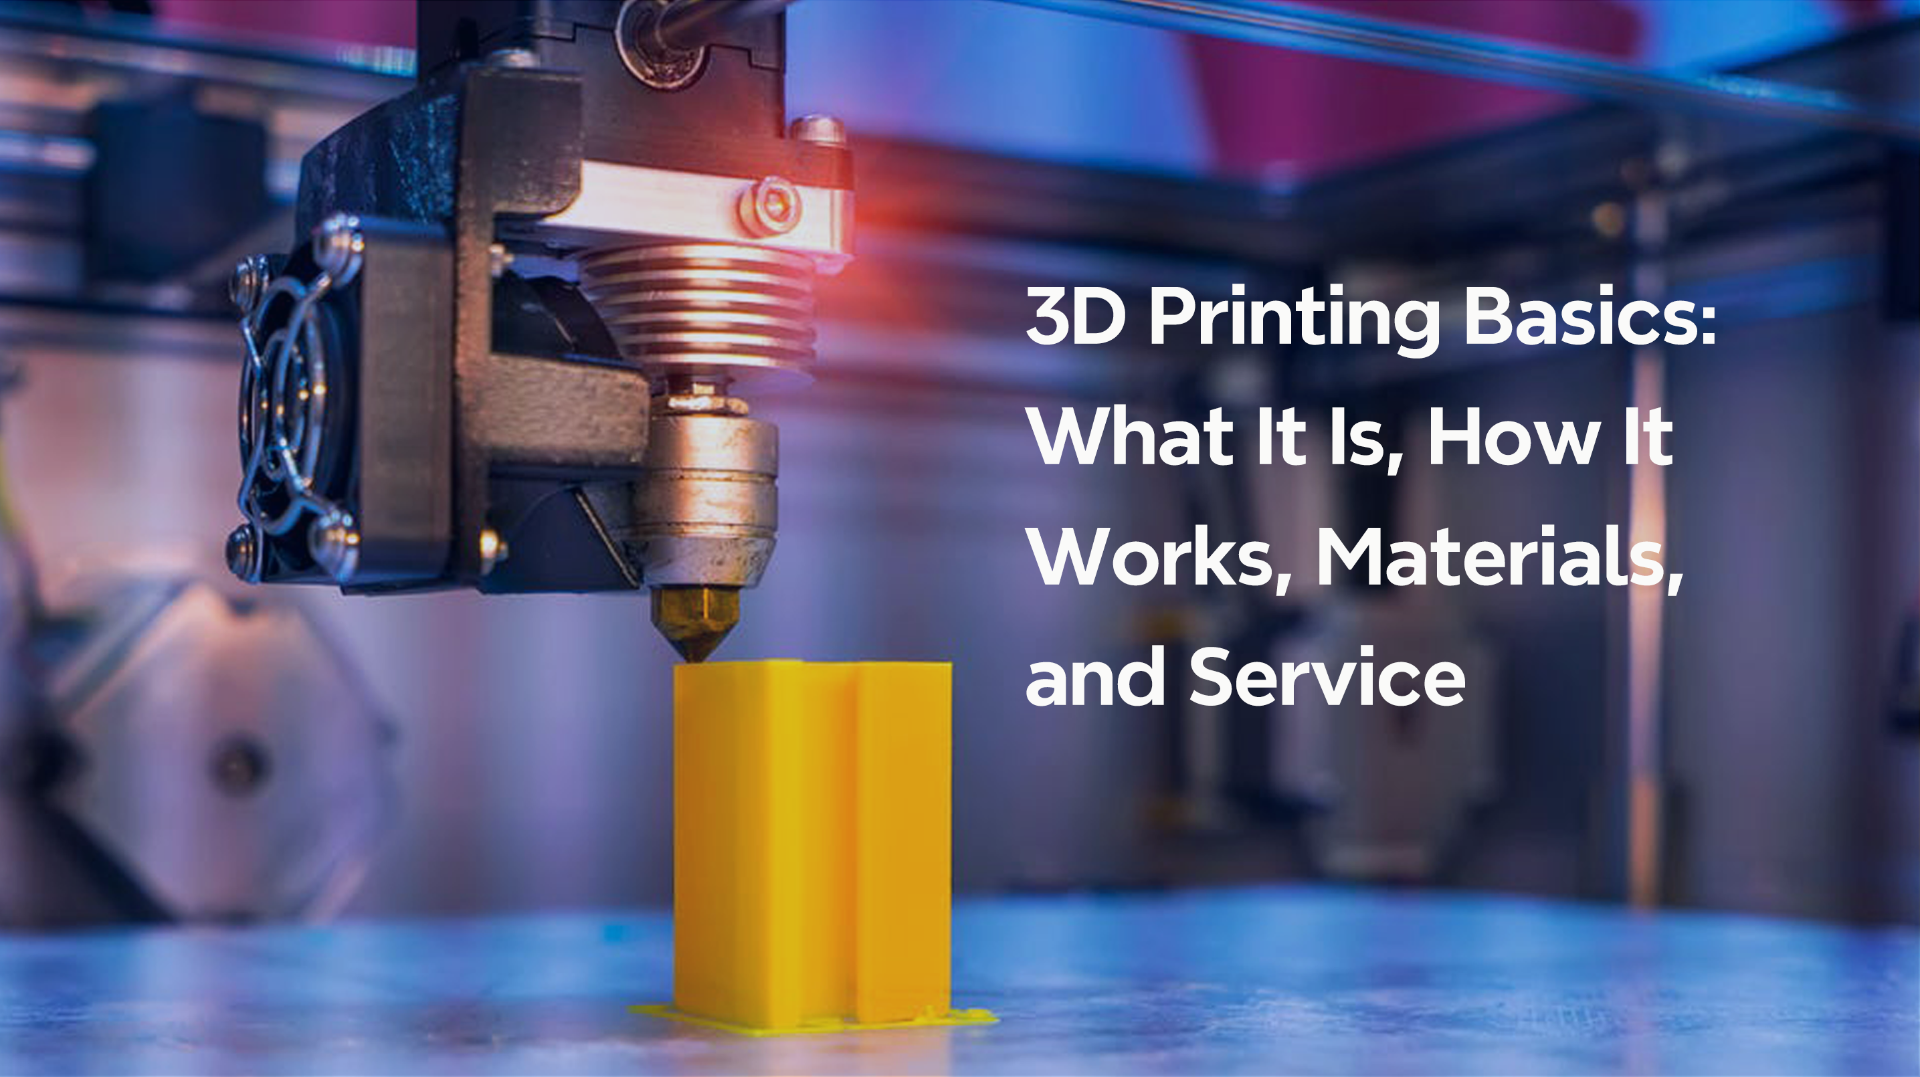 3D Printing Basics: What it is, Process, Materials, and Service